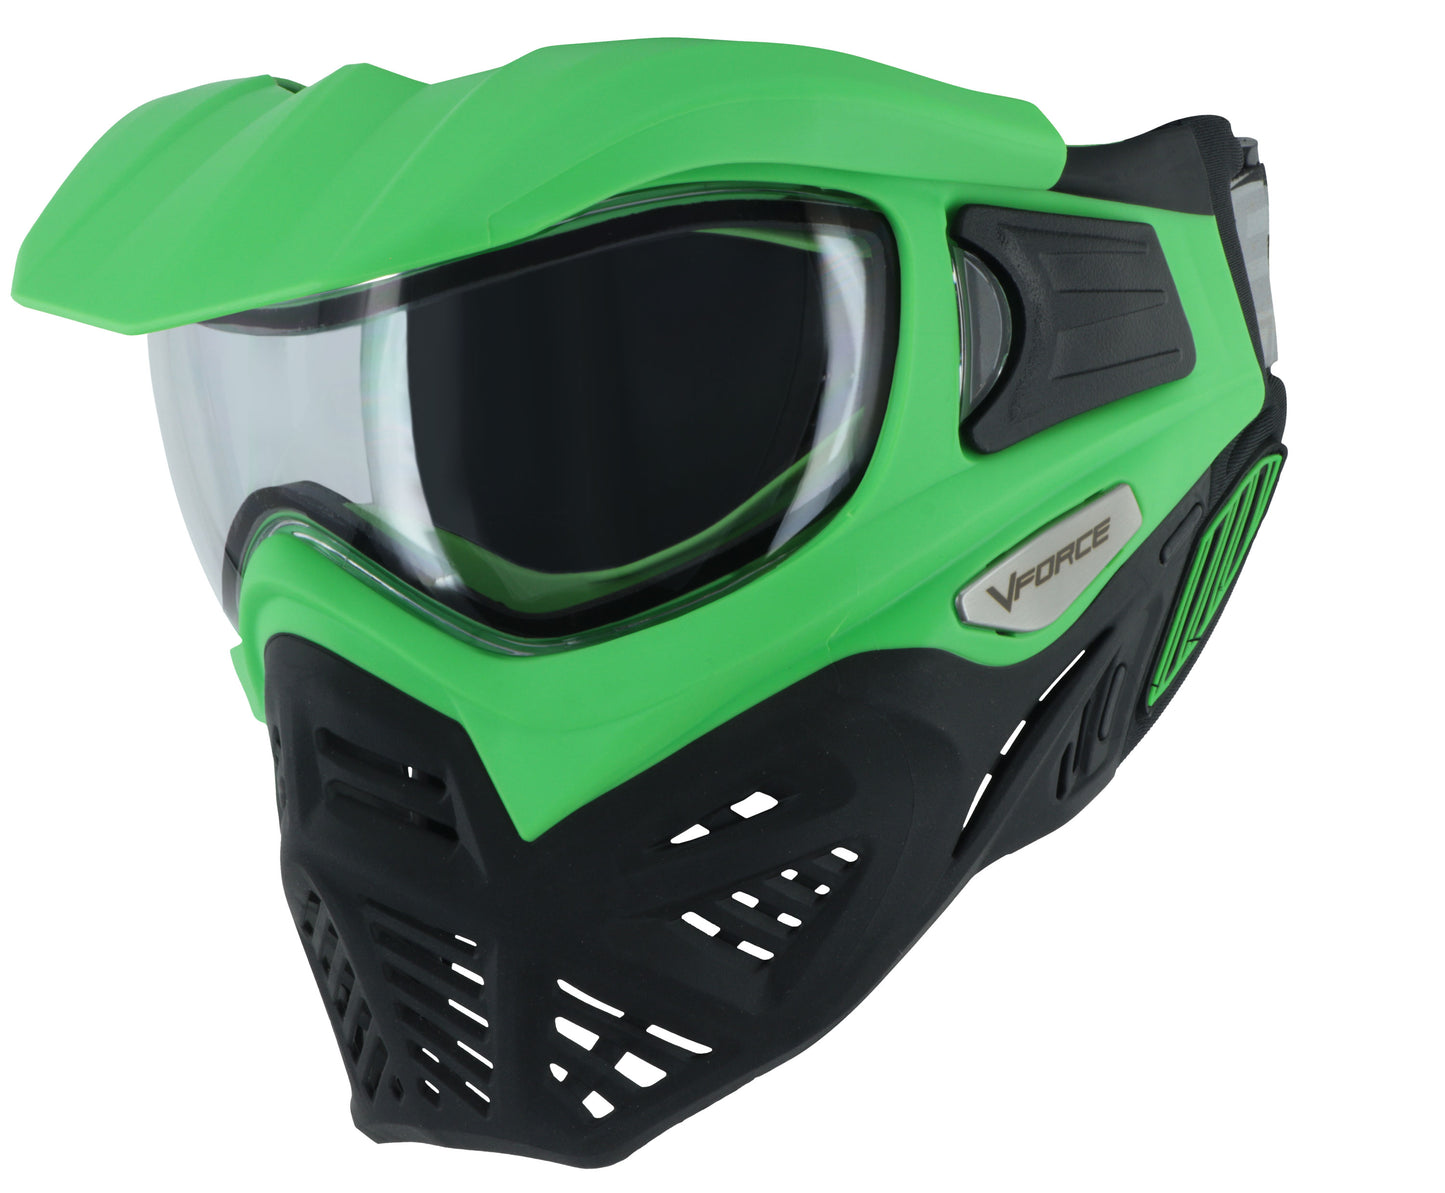 V-Force Grill 2.0 Paintball Goggle - Thermal Clear Lens - Venom (Green/Black)